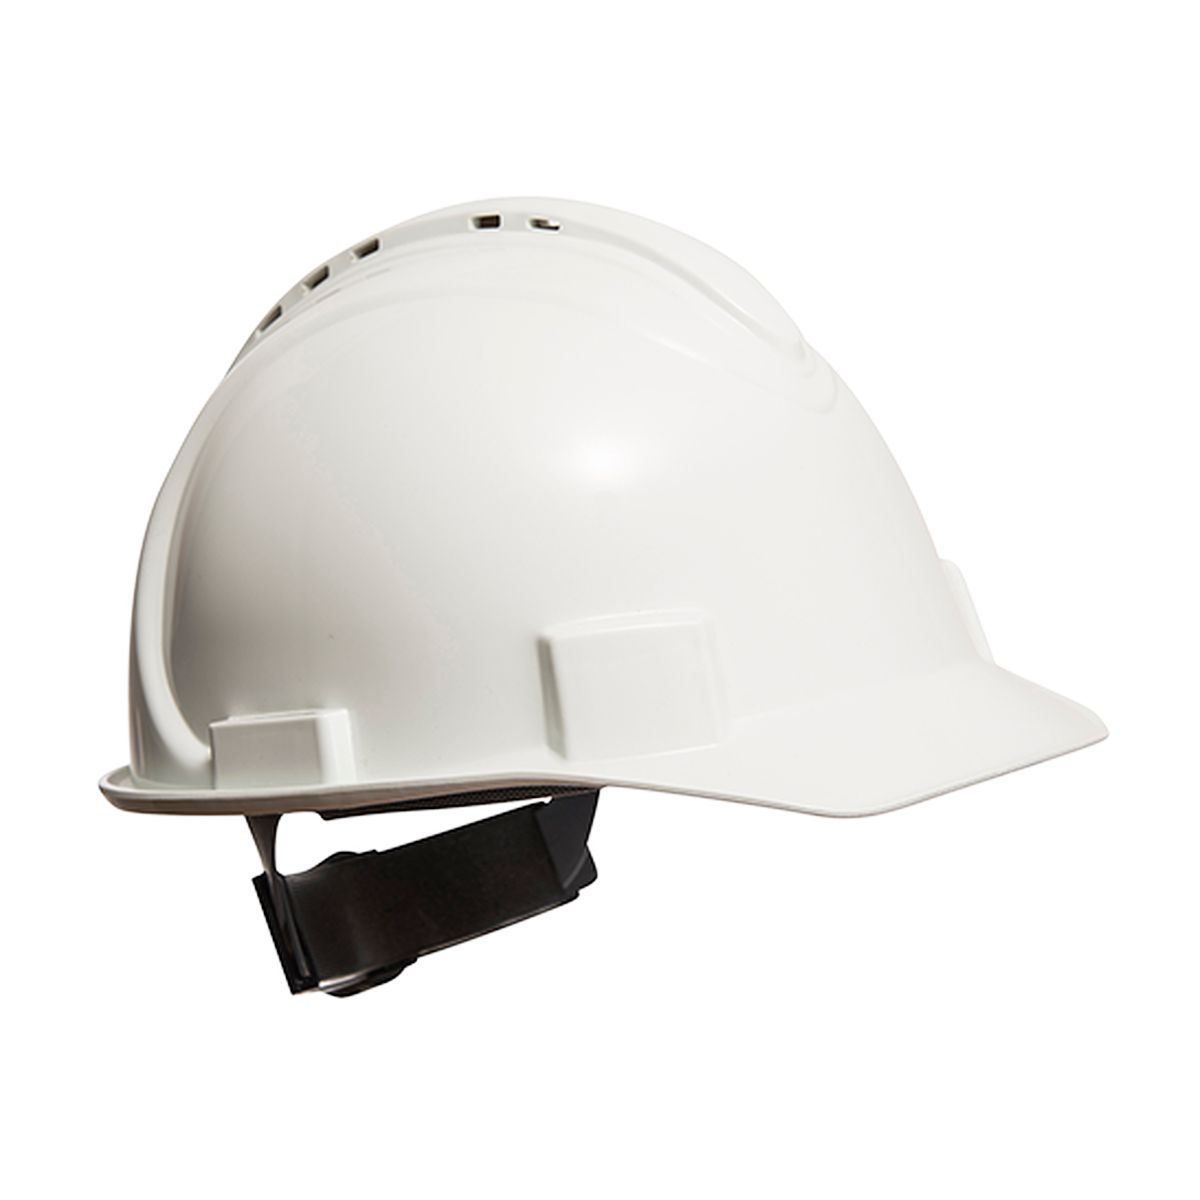 Style PW02 Style PW02 Safety Pro Hard Hat Vented-4